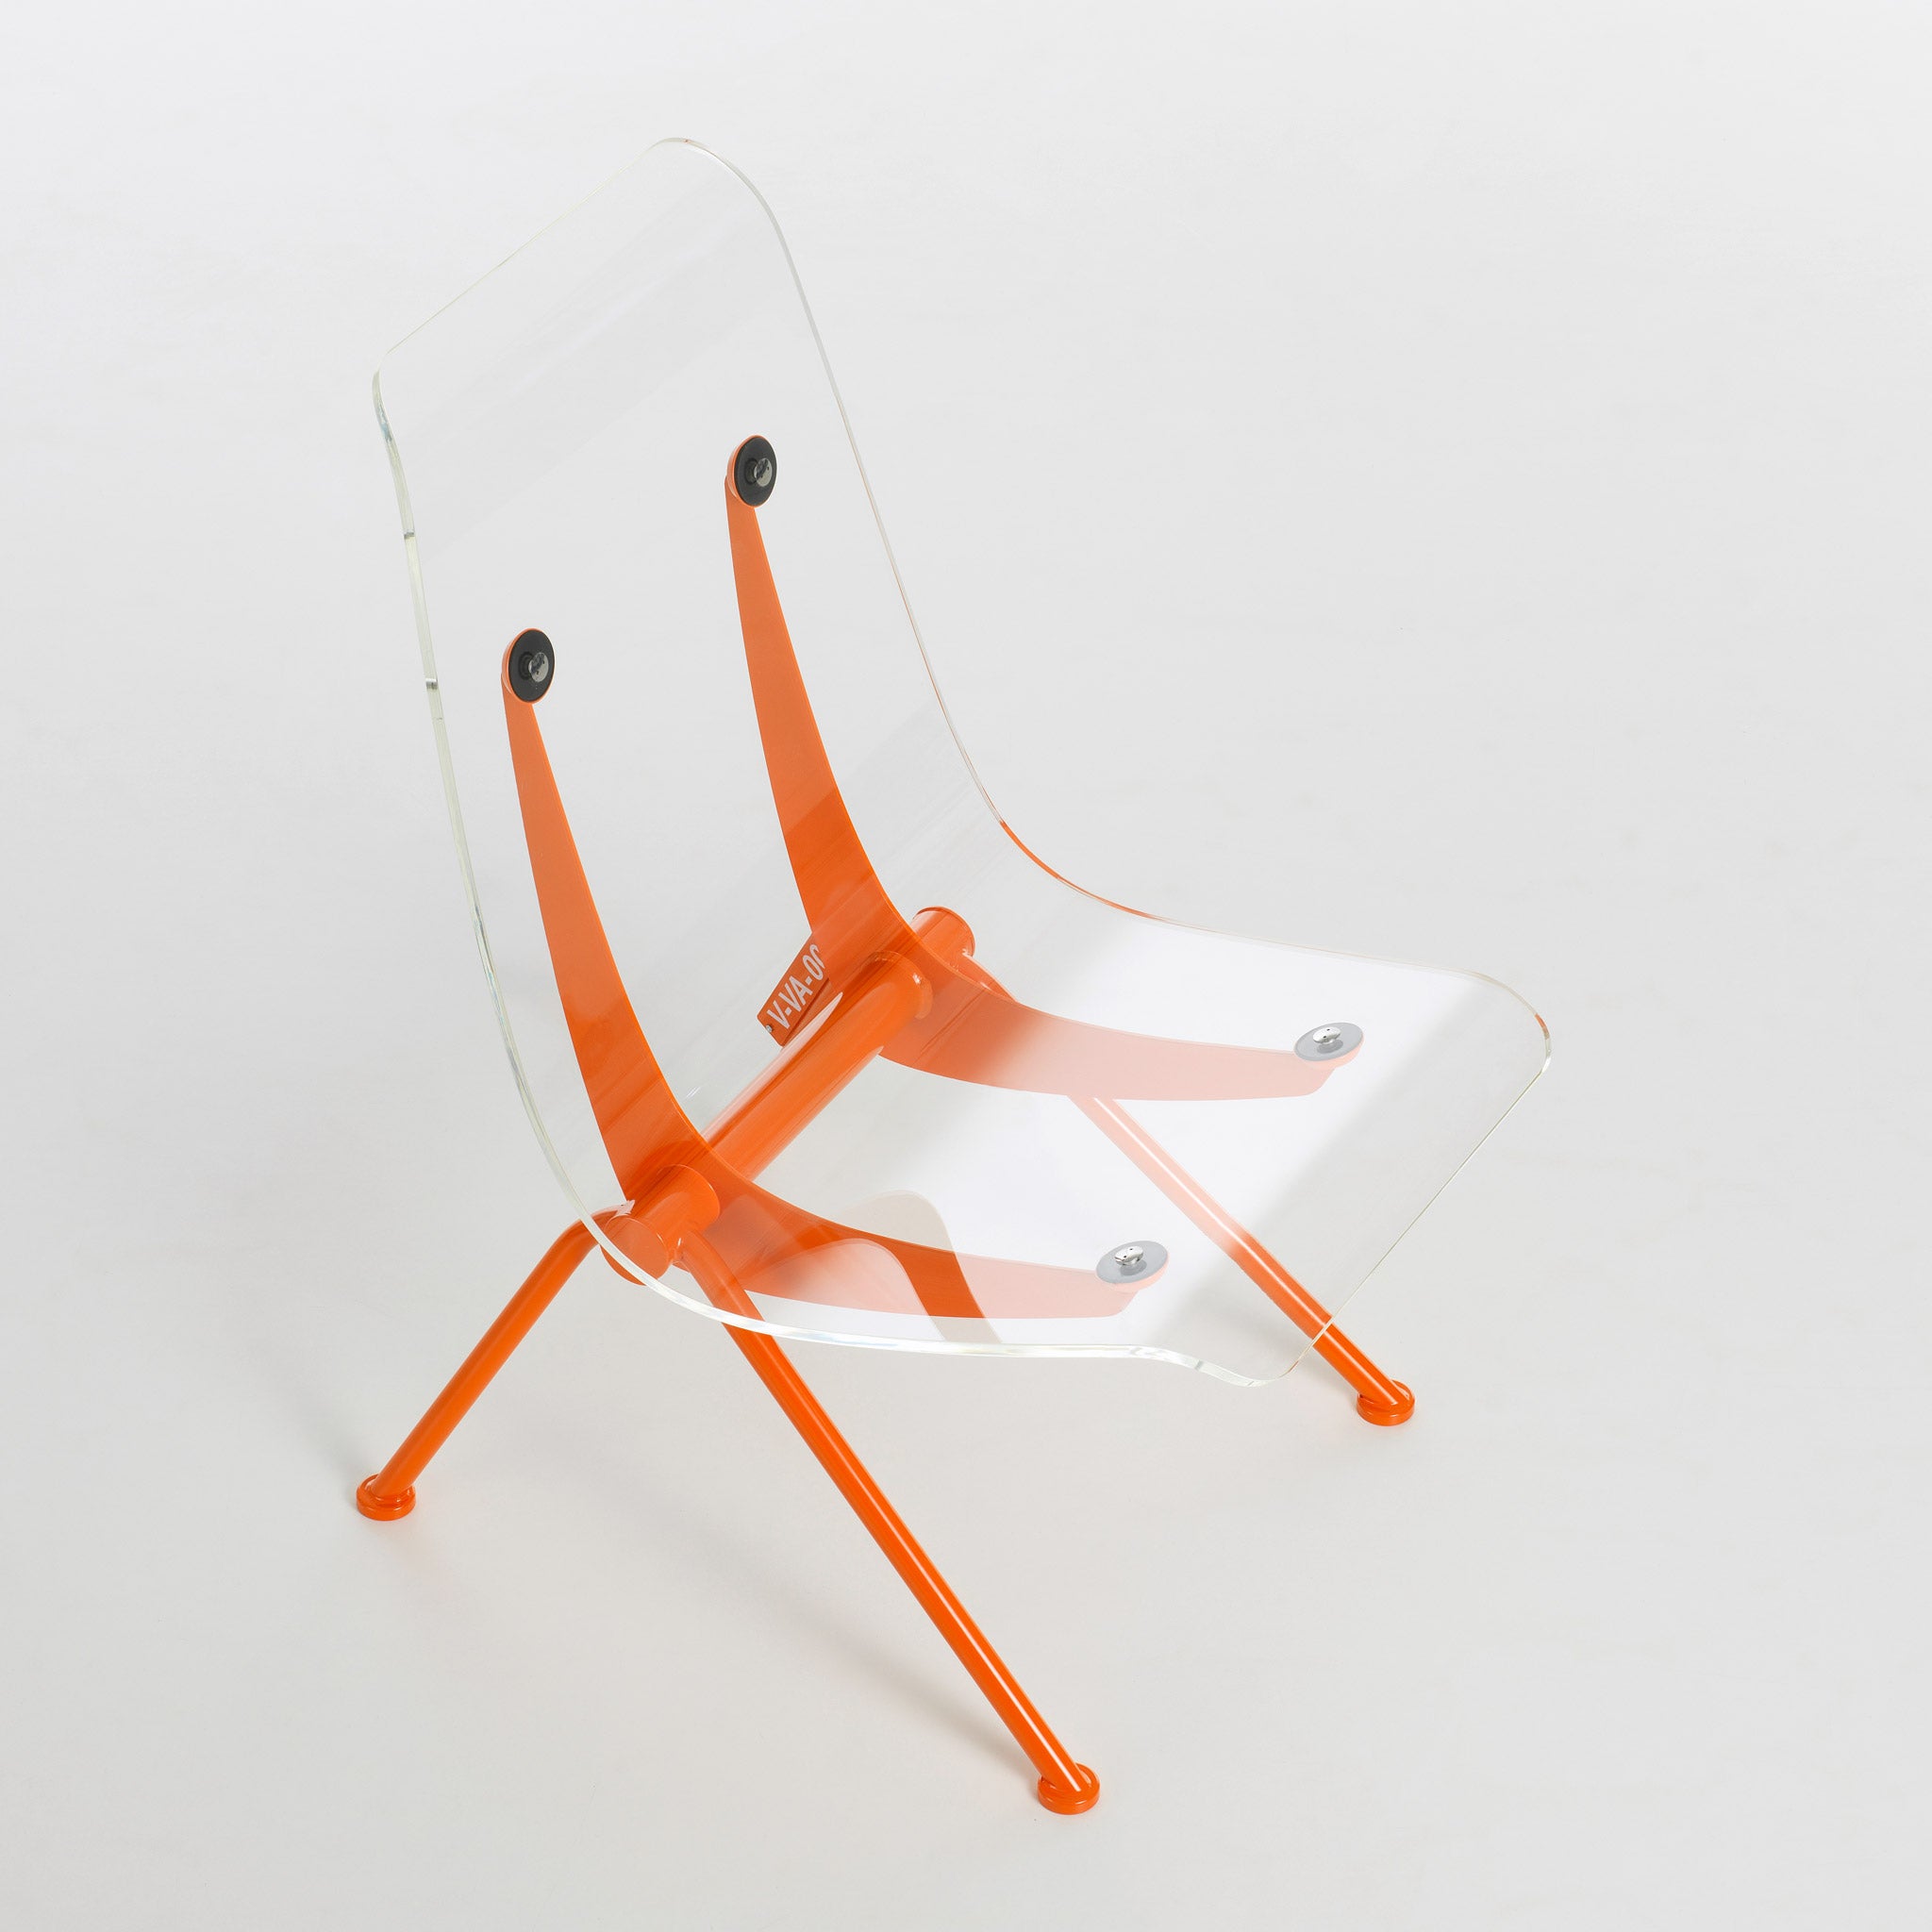 Jean Prouvé - Antony Chair by Virgil Abloh for Vitra